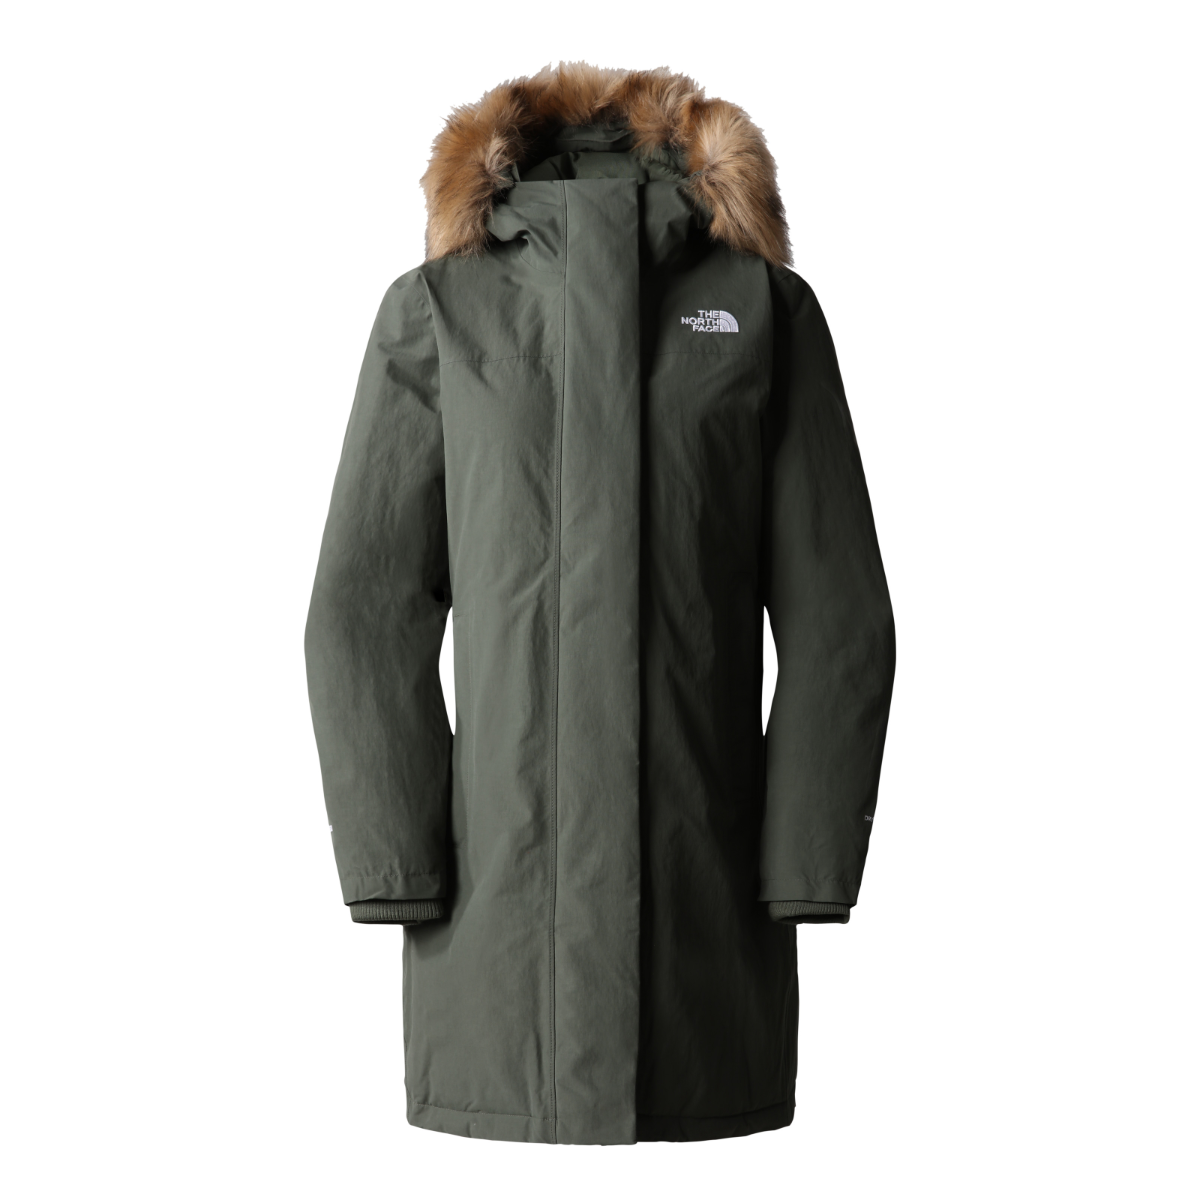 The North Face Arctic Parka Insulated Women's Jacket | Thyme